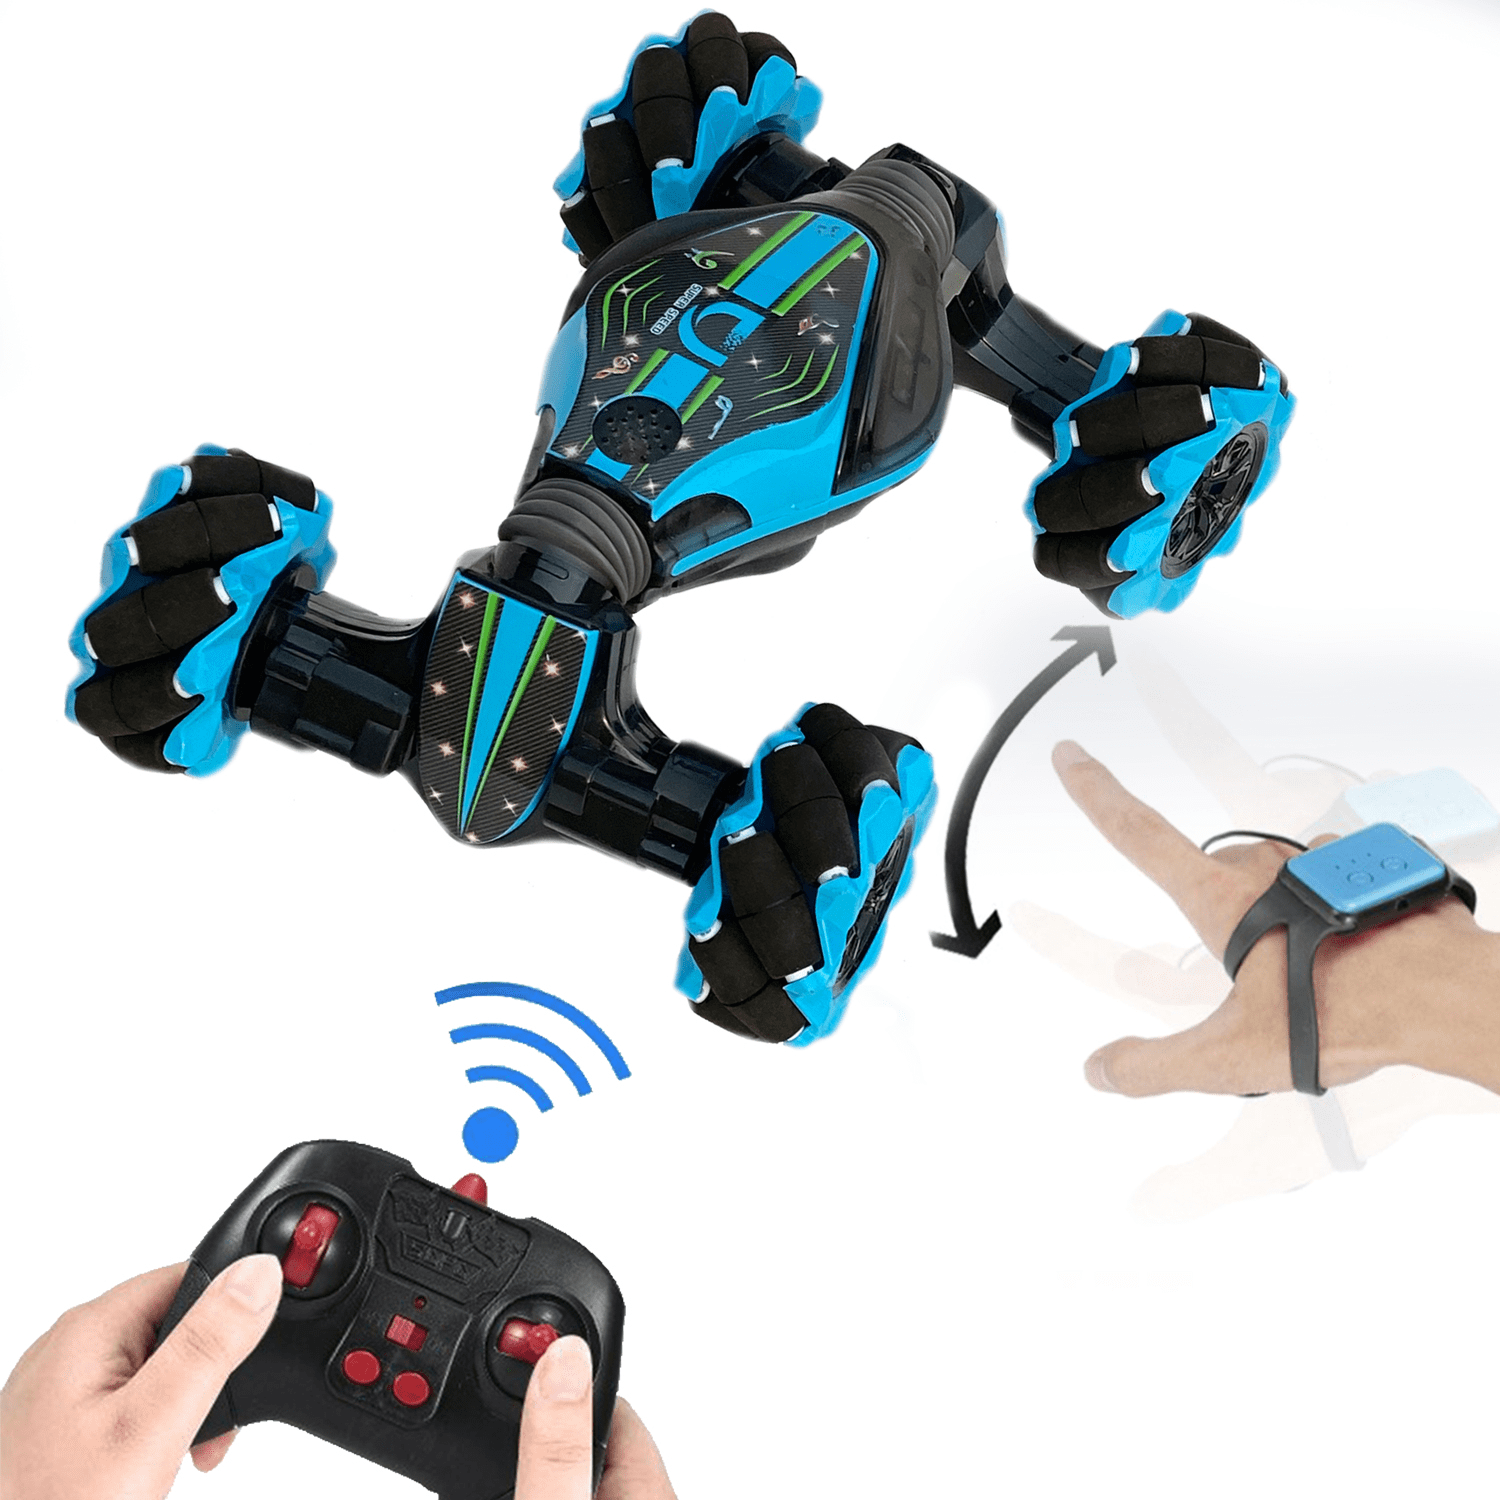 Details about   360° Rotating Remote Control RC Car 4WD 2.4G Drift Stunt Car High Speed Kids Toy 